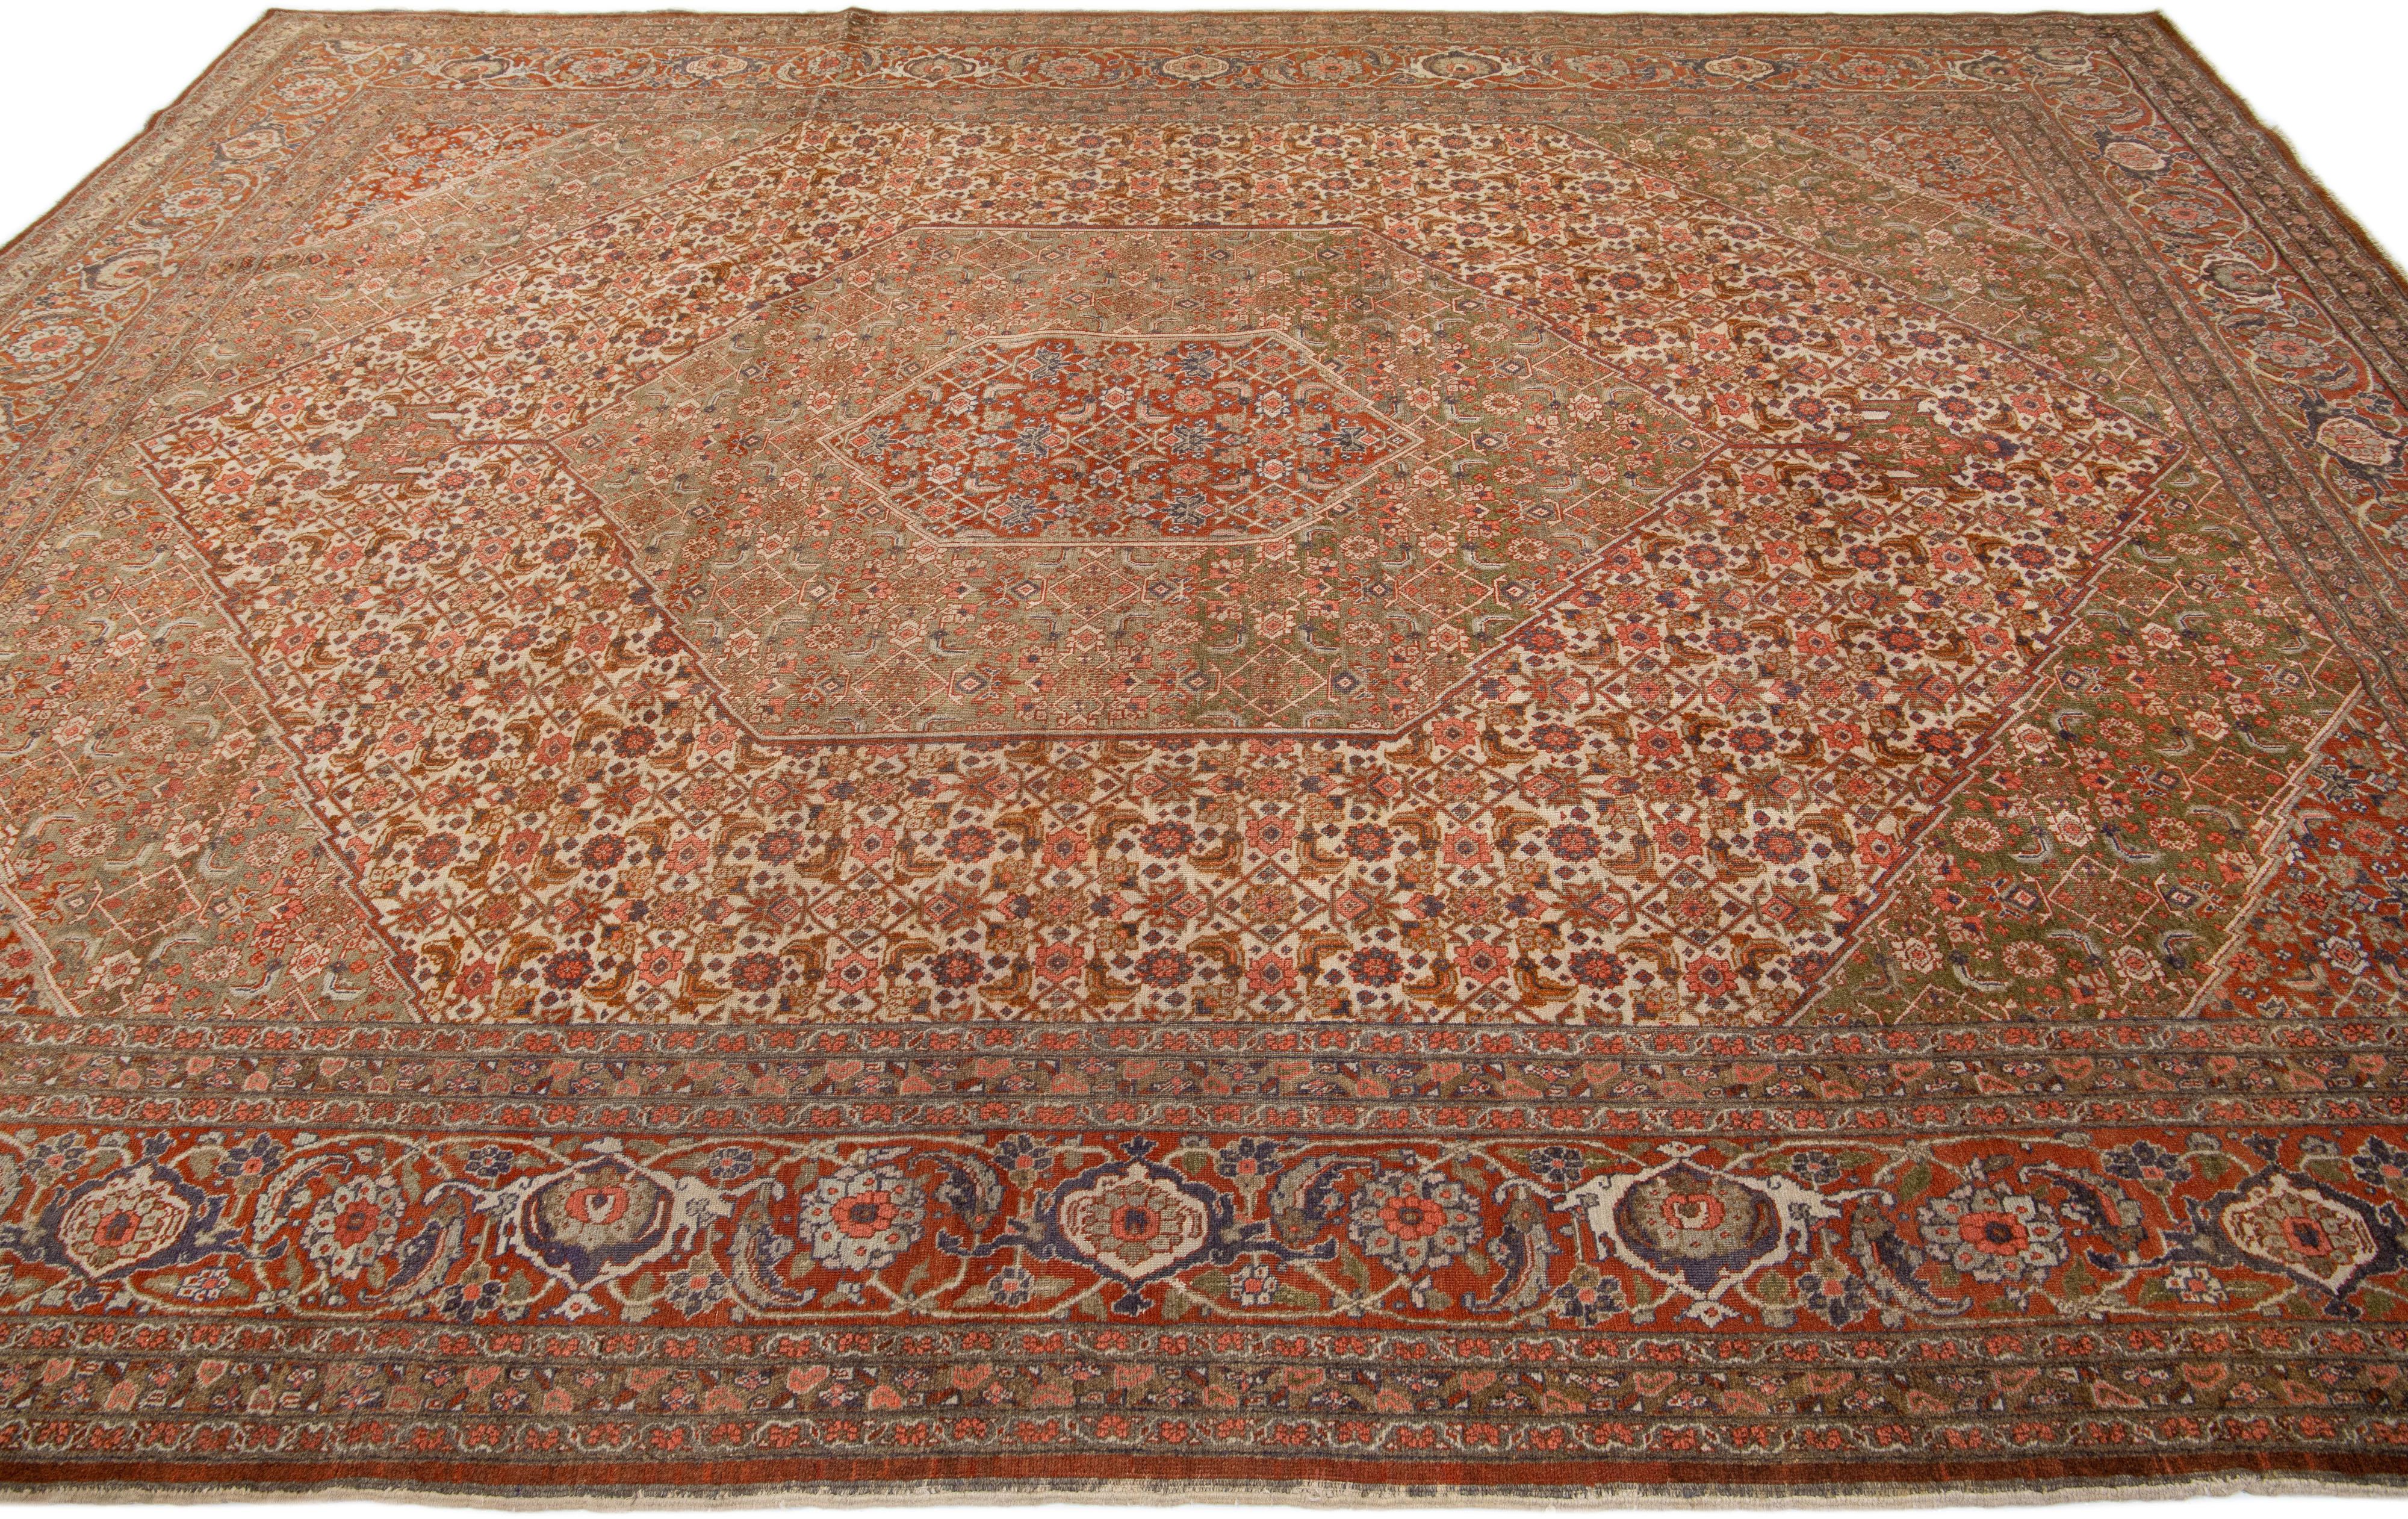 1900's Antique Persian Tabriz Beige Wool Rug with Allover Motif In Good Condition For Sale In Norwalk, CT